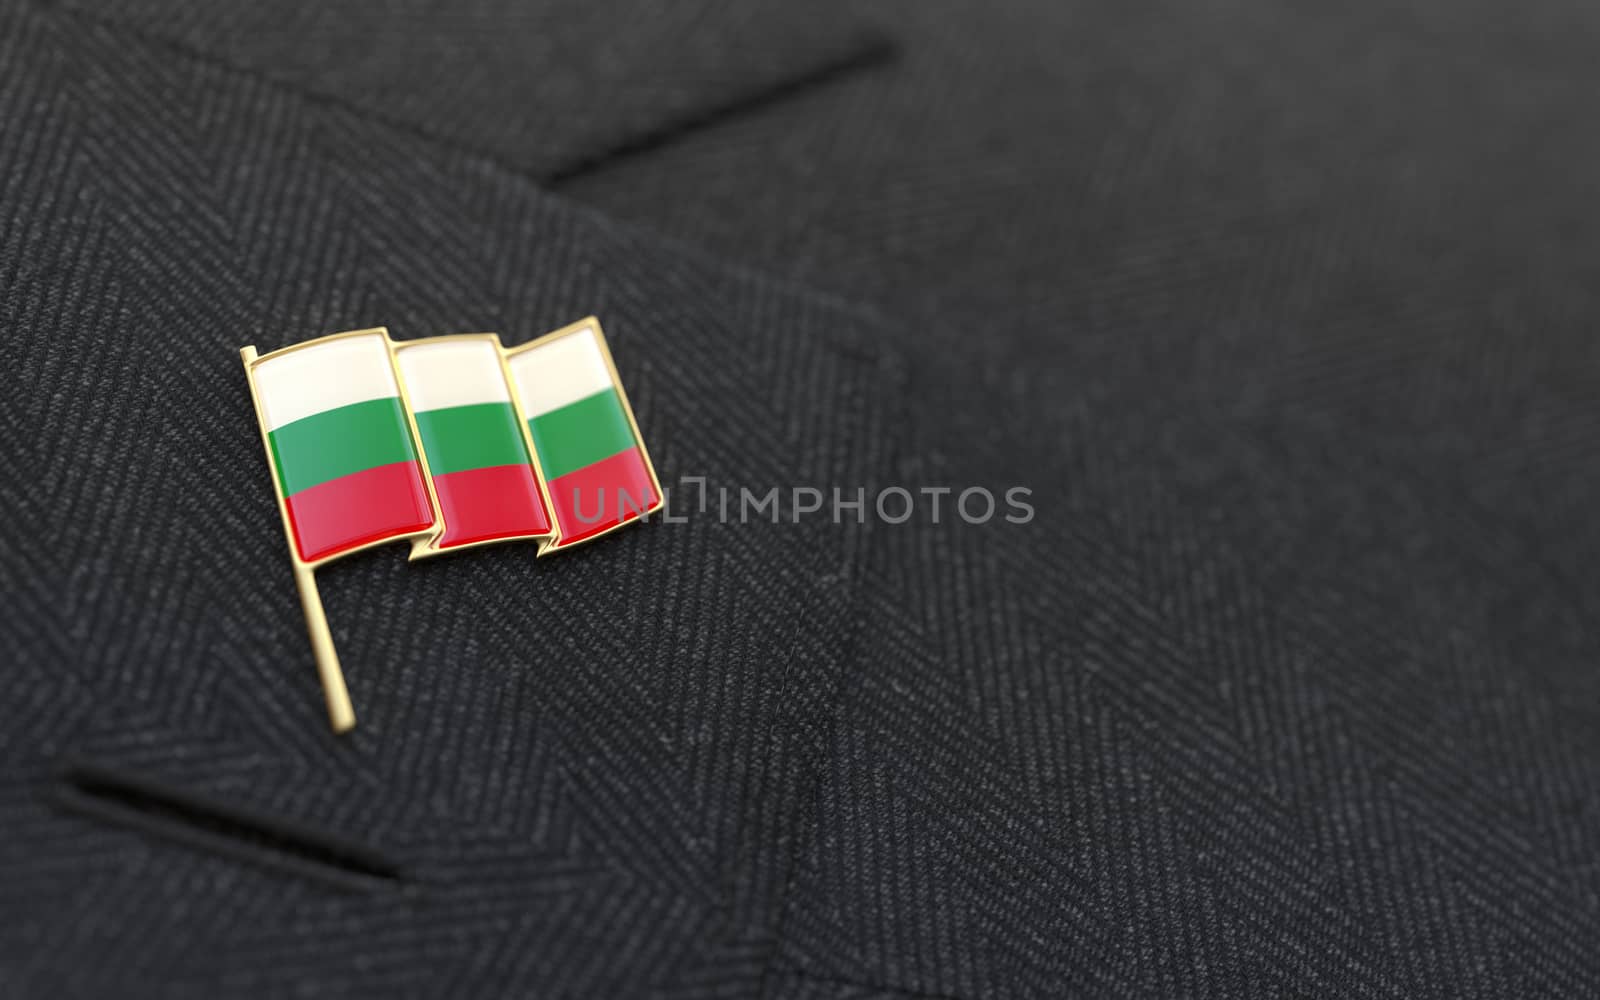 Bulgaria flag lapel pin on the collar of a business suit jacket shows patriotism